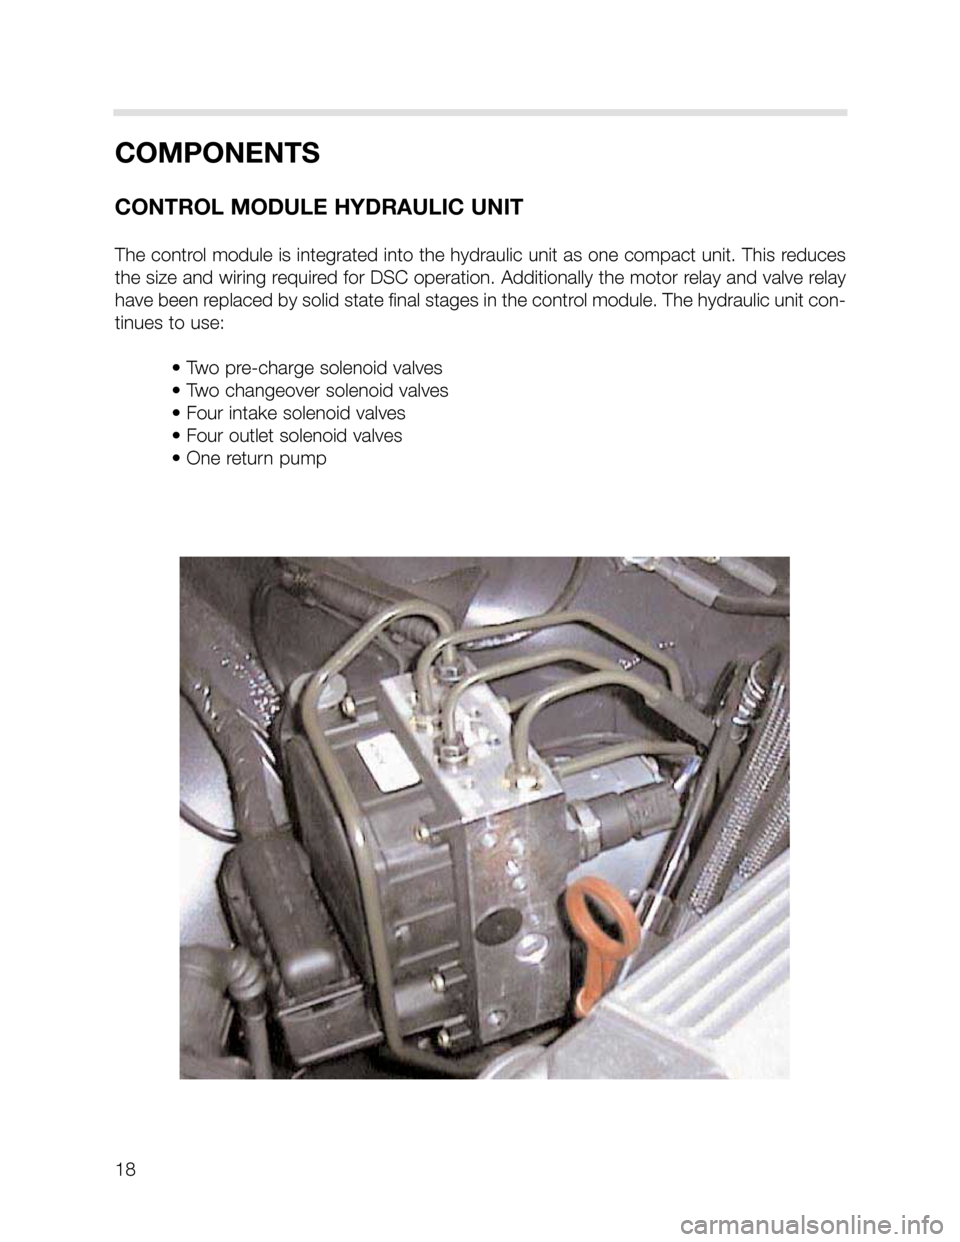 BMW X5 2005 E53 DSC System Workshop Manual 18
COMPONENTS
CONTROL MODULE HYDRAULIC UNIT
The control module is integrated into the hydraulic unit as one compact unit. This reduces
the size and wiring required for DSC operation. Additionally the 